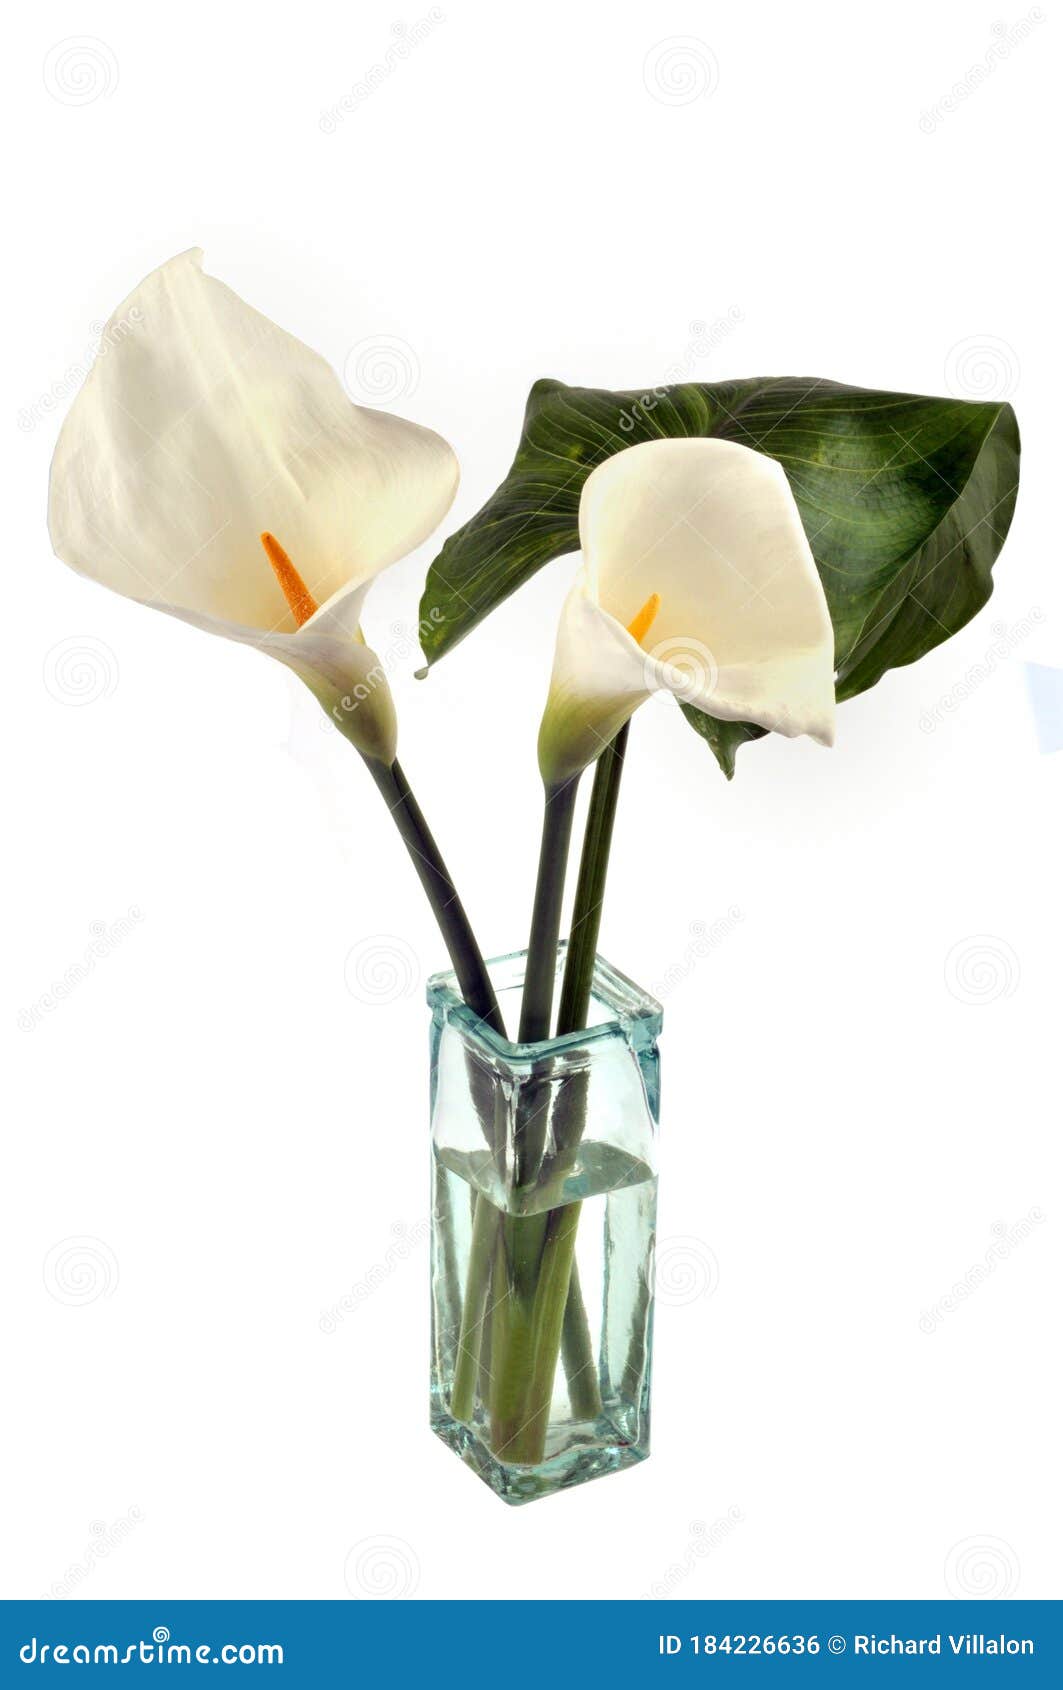 arums in a vase on a white background